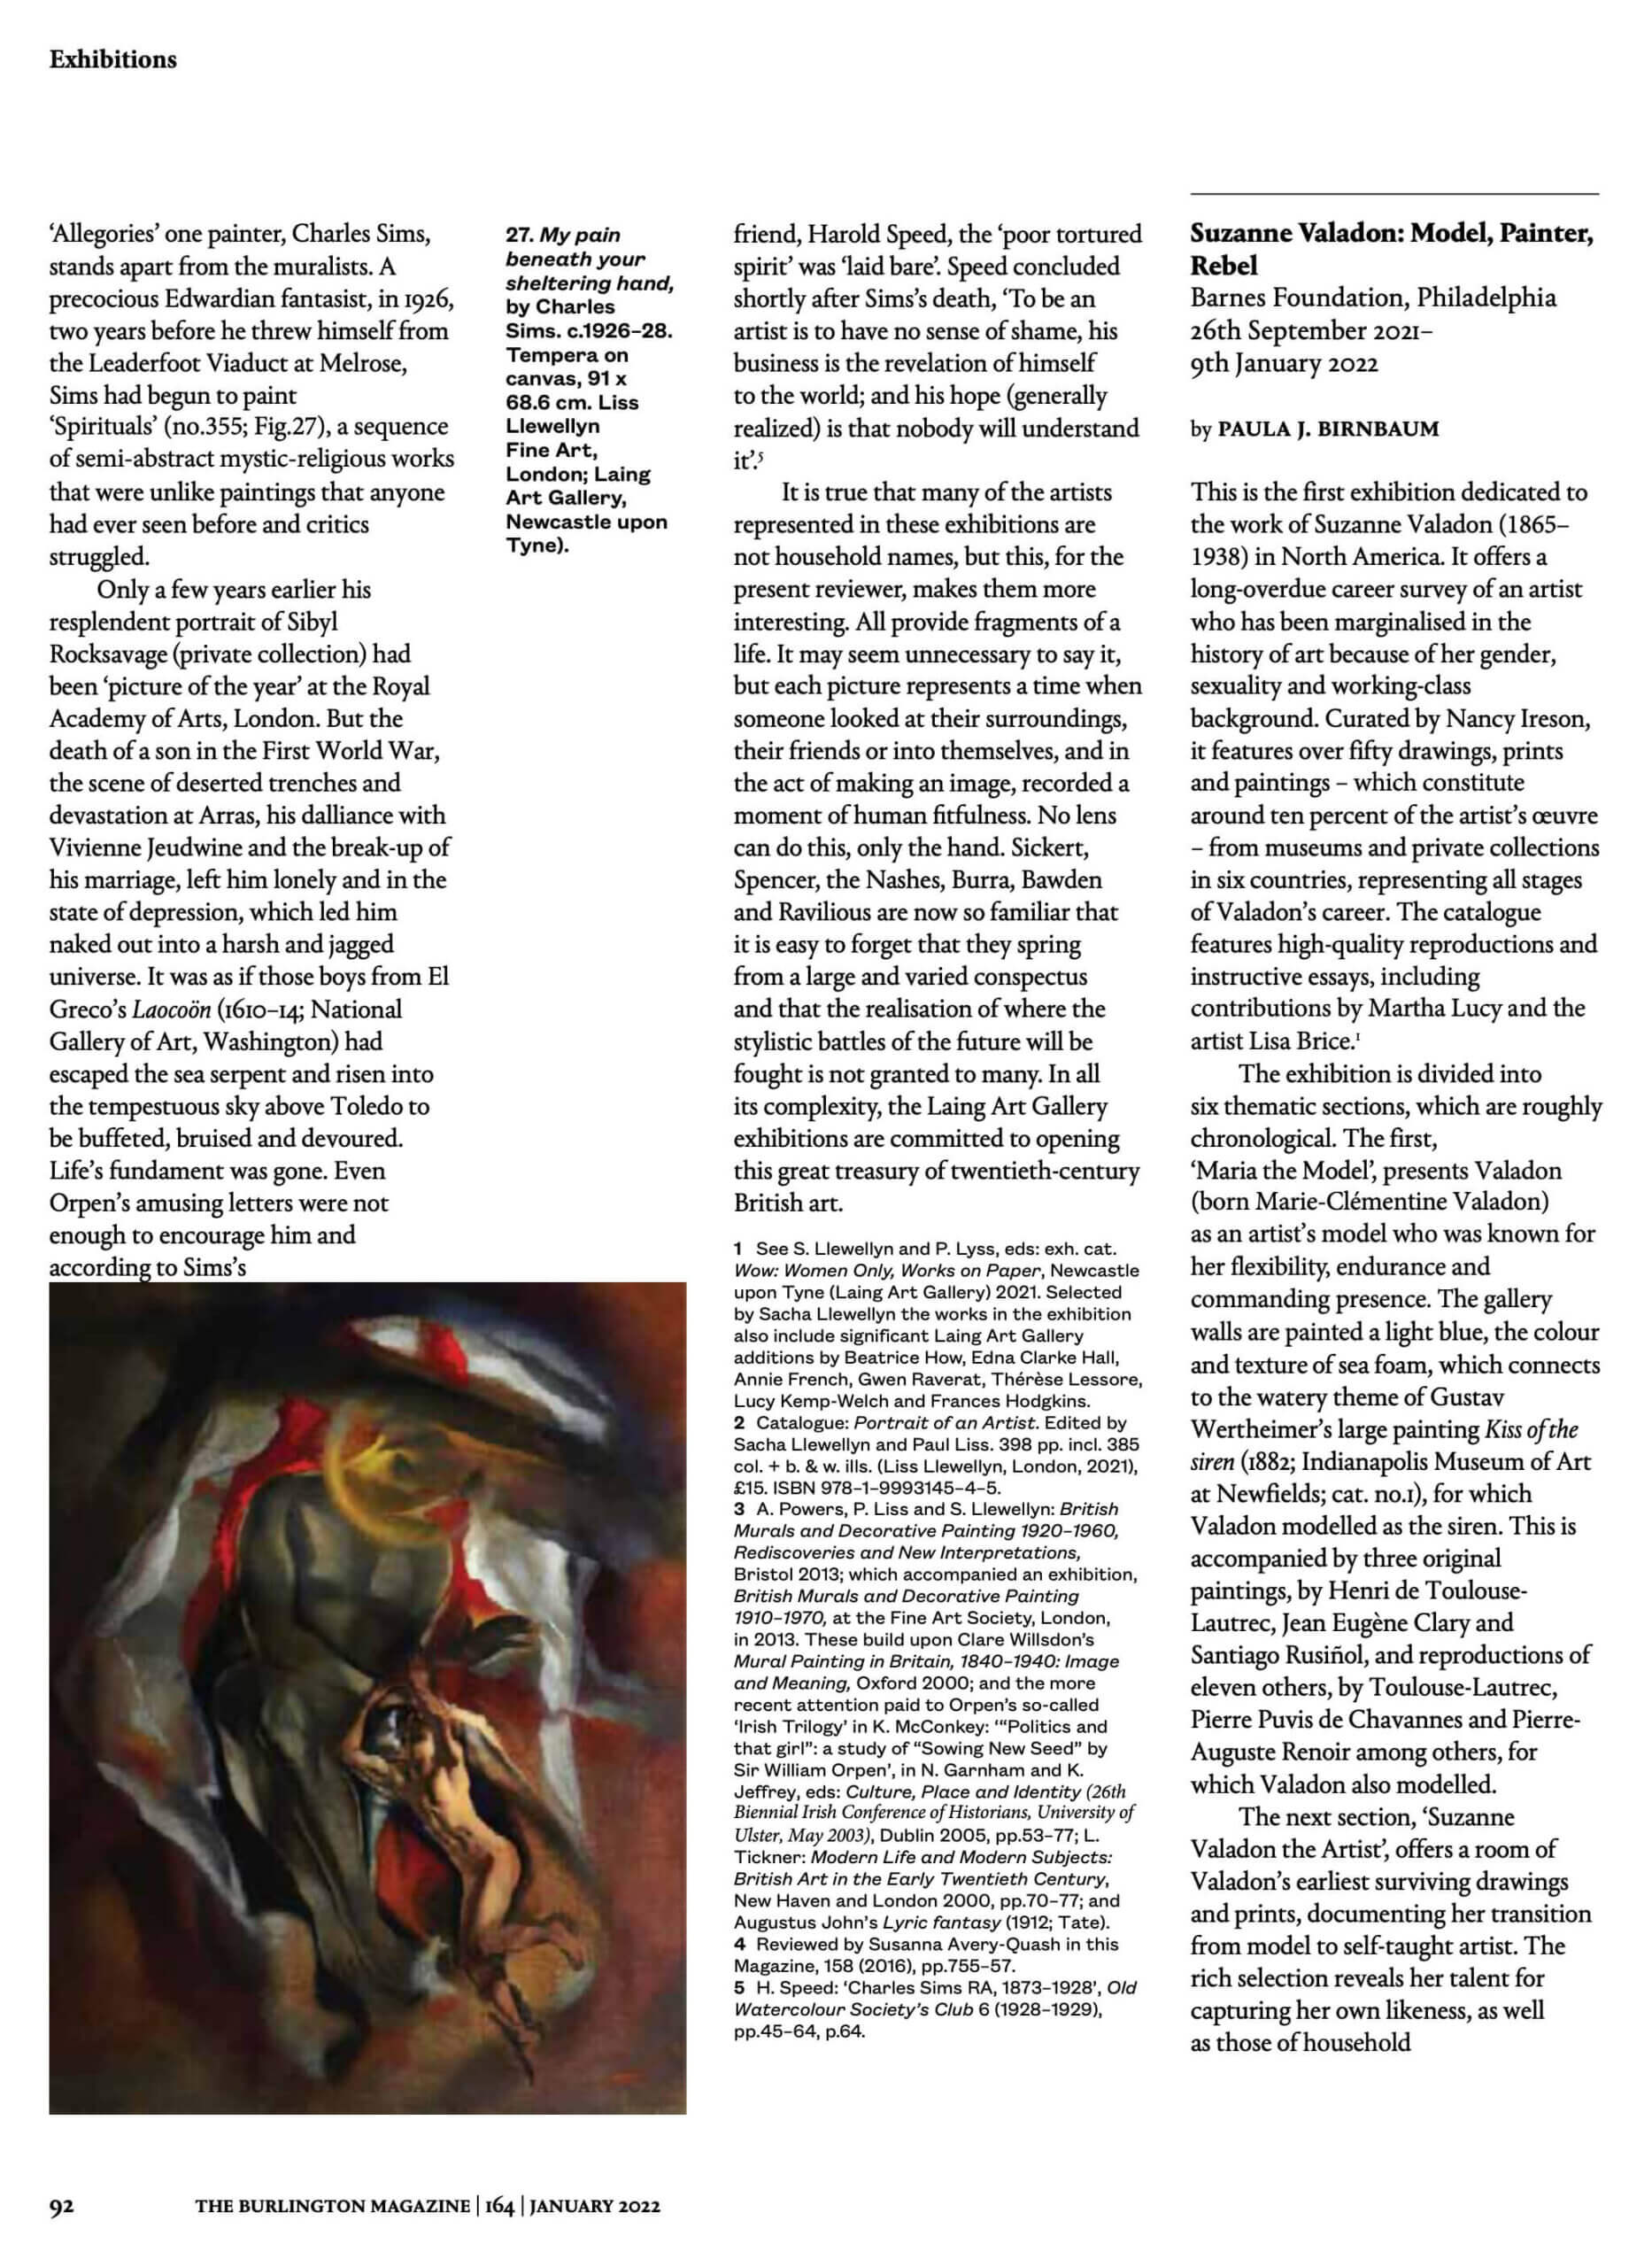 Kenneth McConkey - Exhibition Review for Portrait of an Artist - Page 3